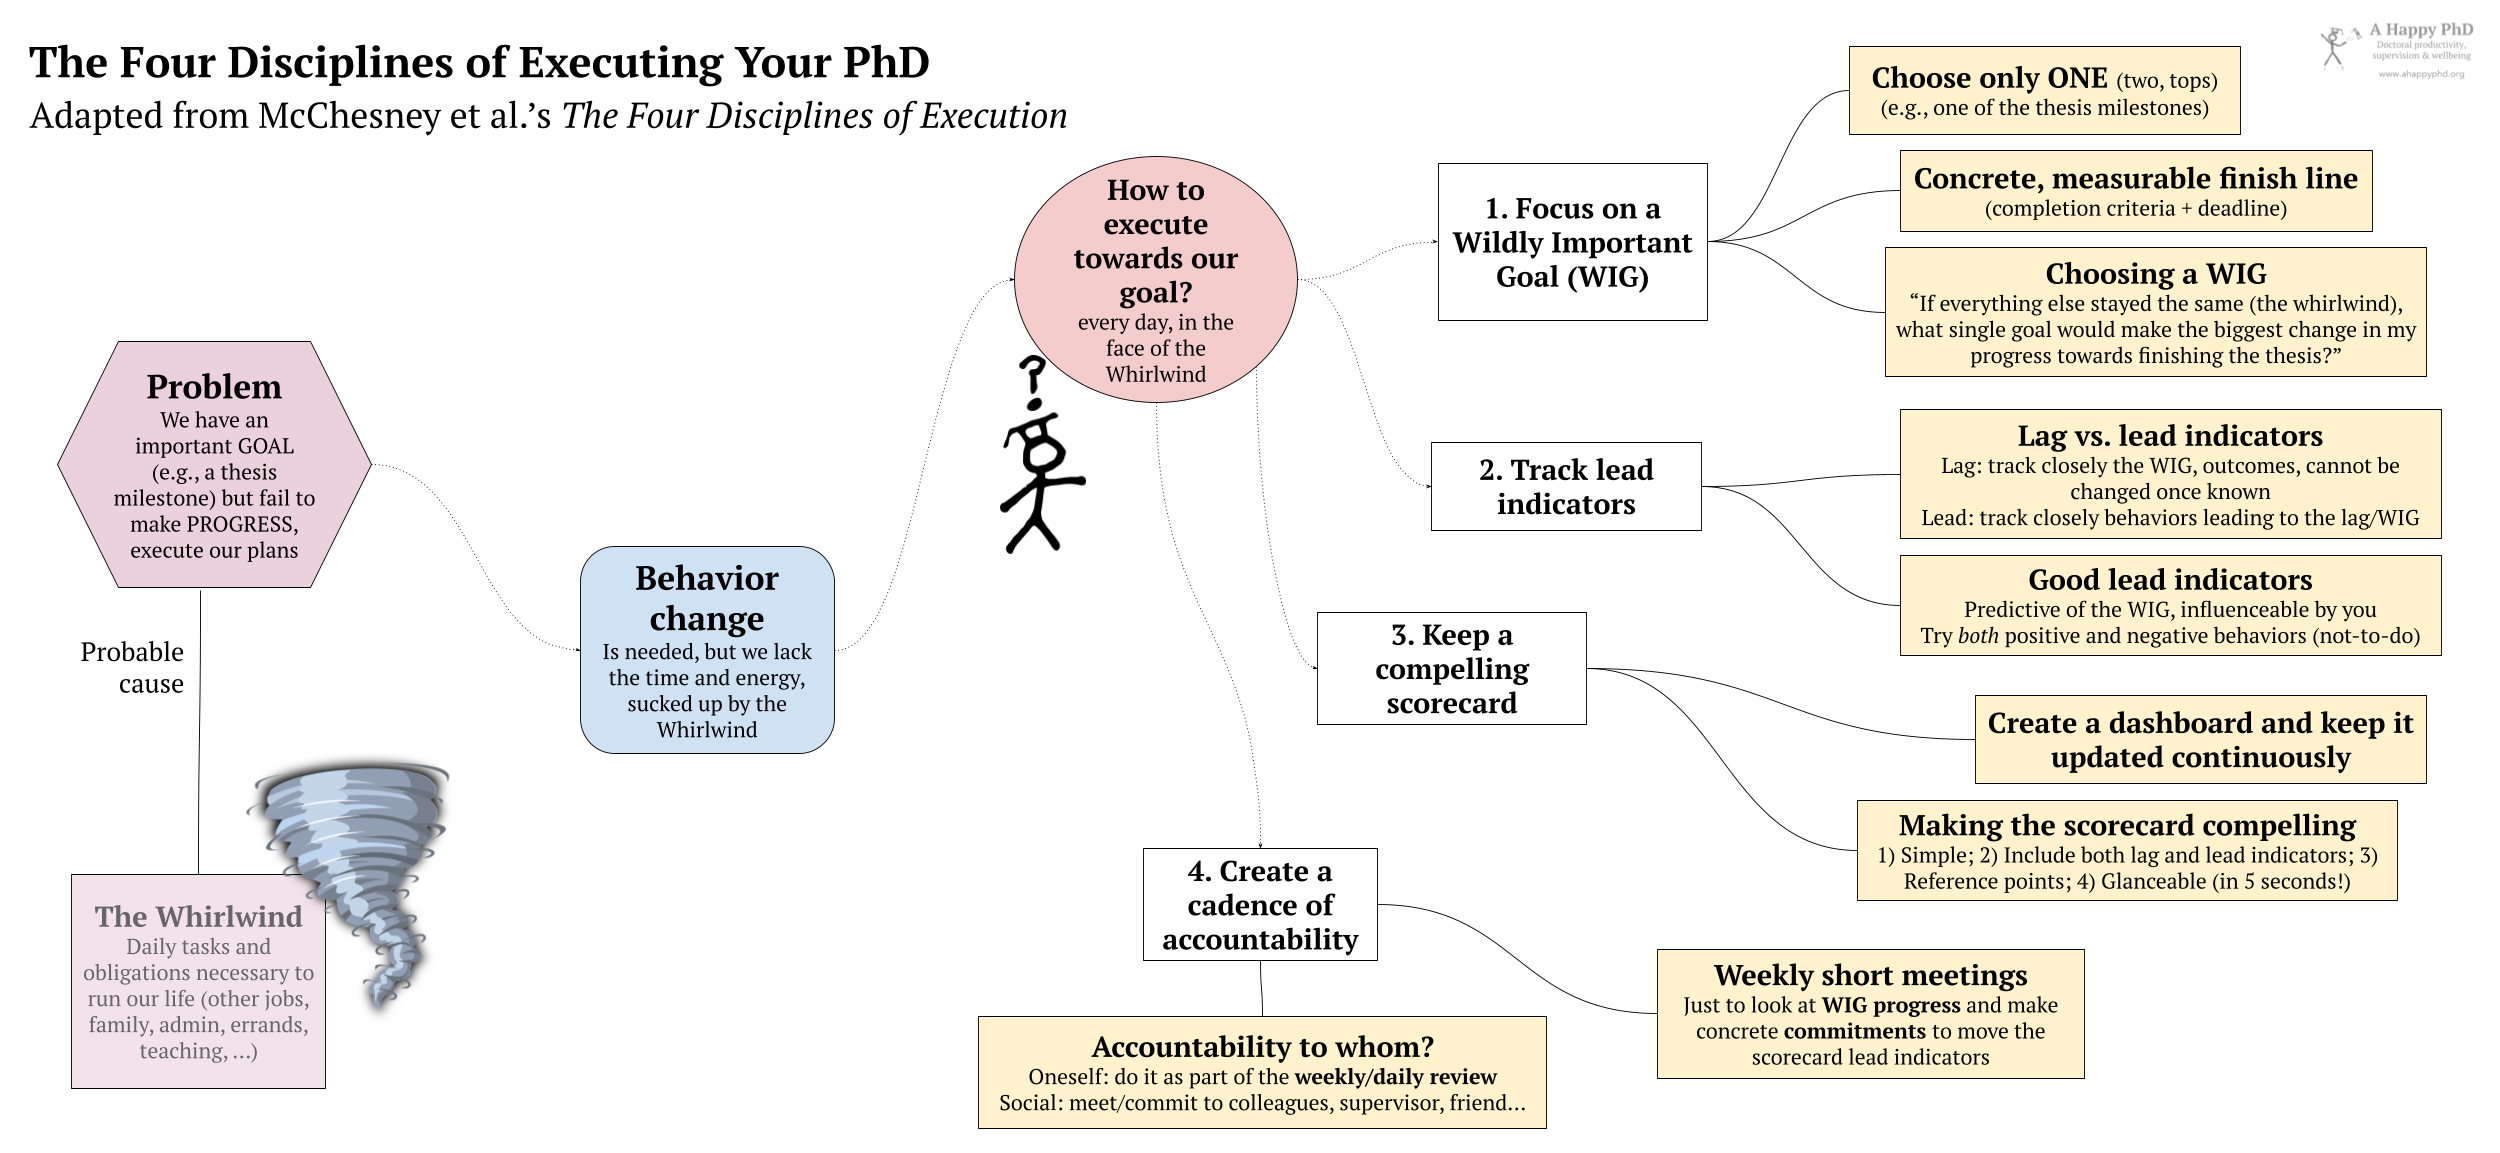 The four disciplines of executing your PhD: focus on a WIG, track lead indicators, create a scorecard and a cadence of accountability